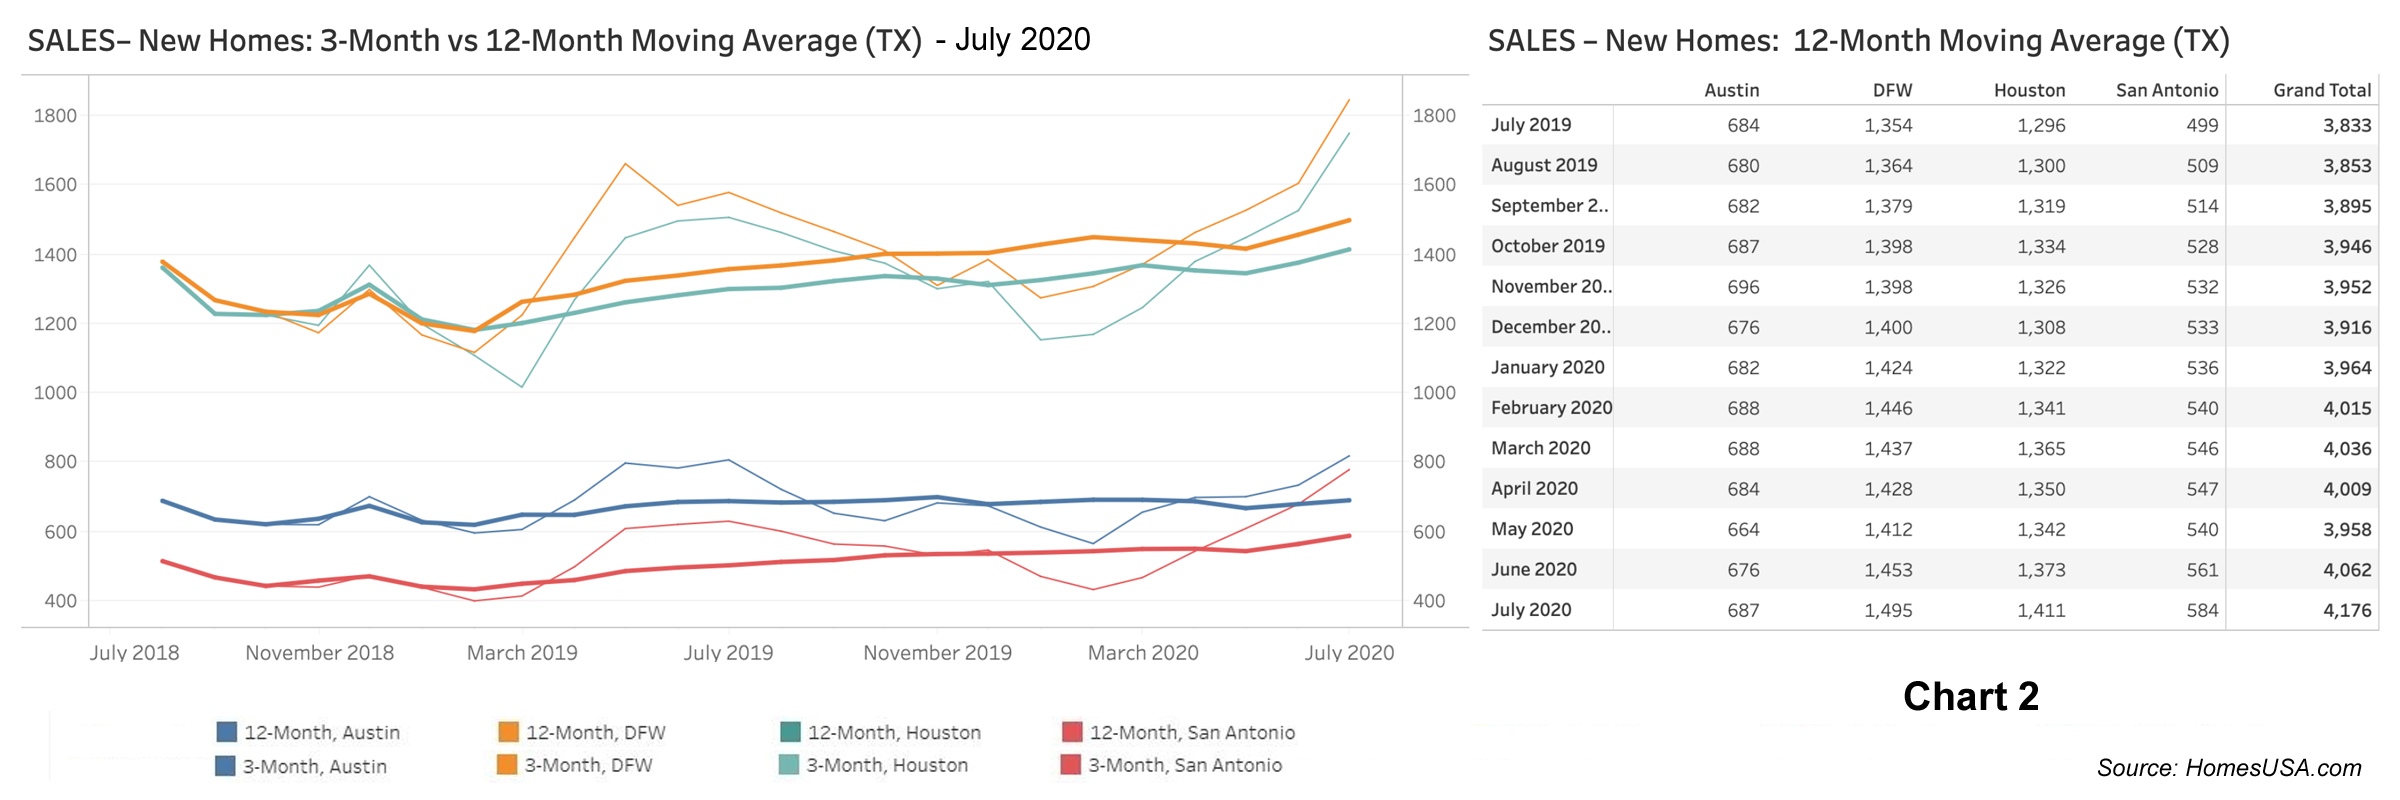 Chart 2: Texas New Home Sales - July 2020